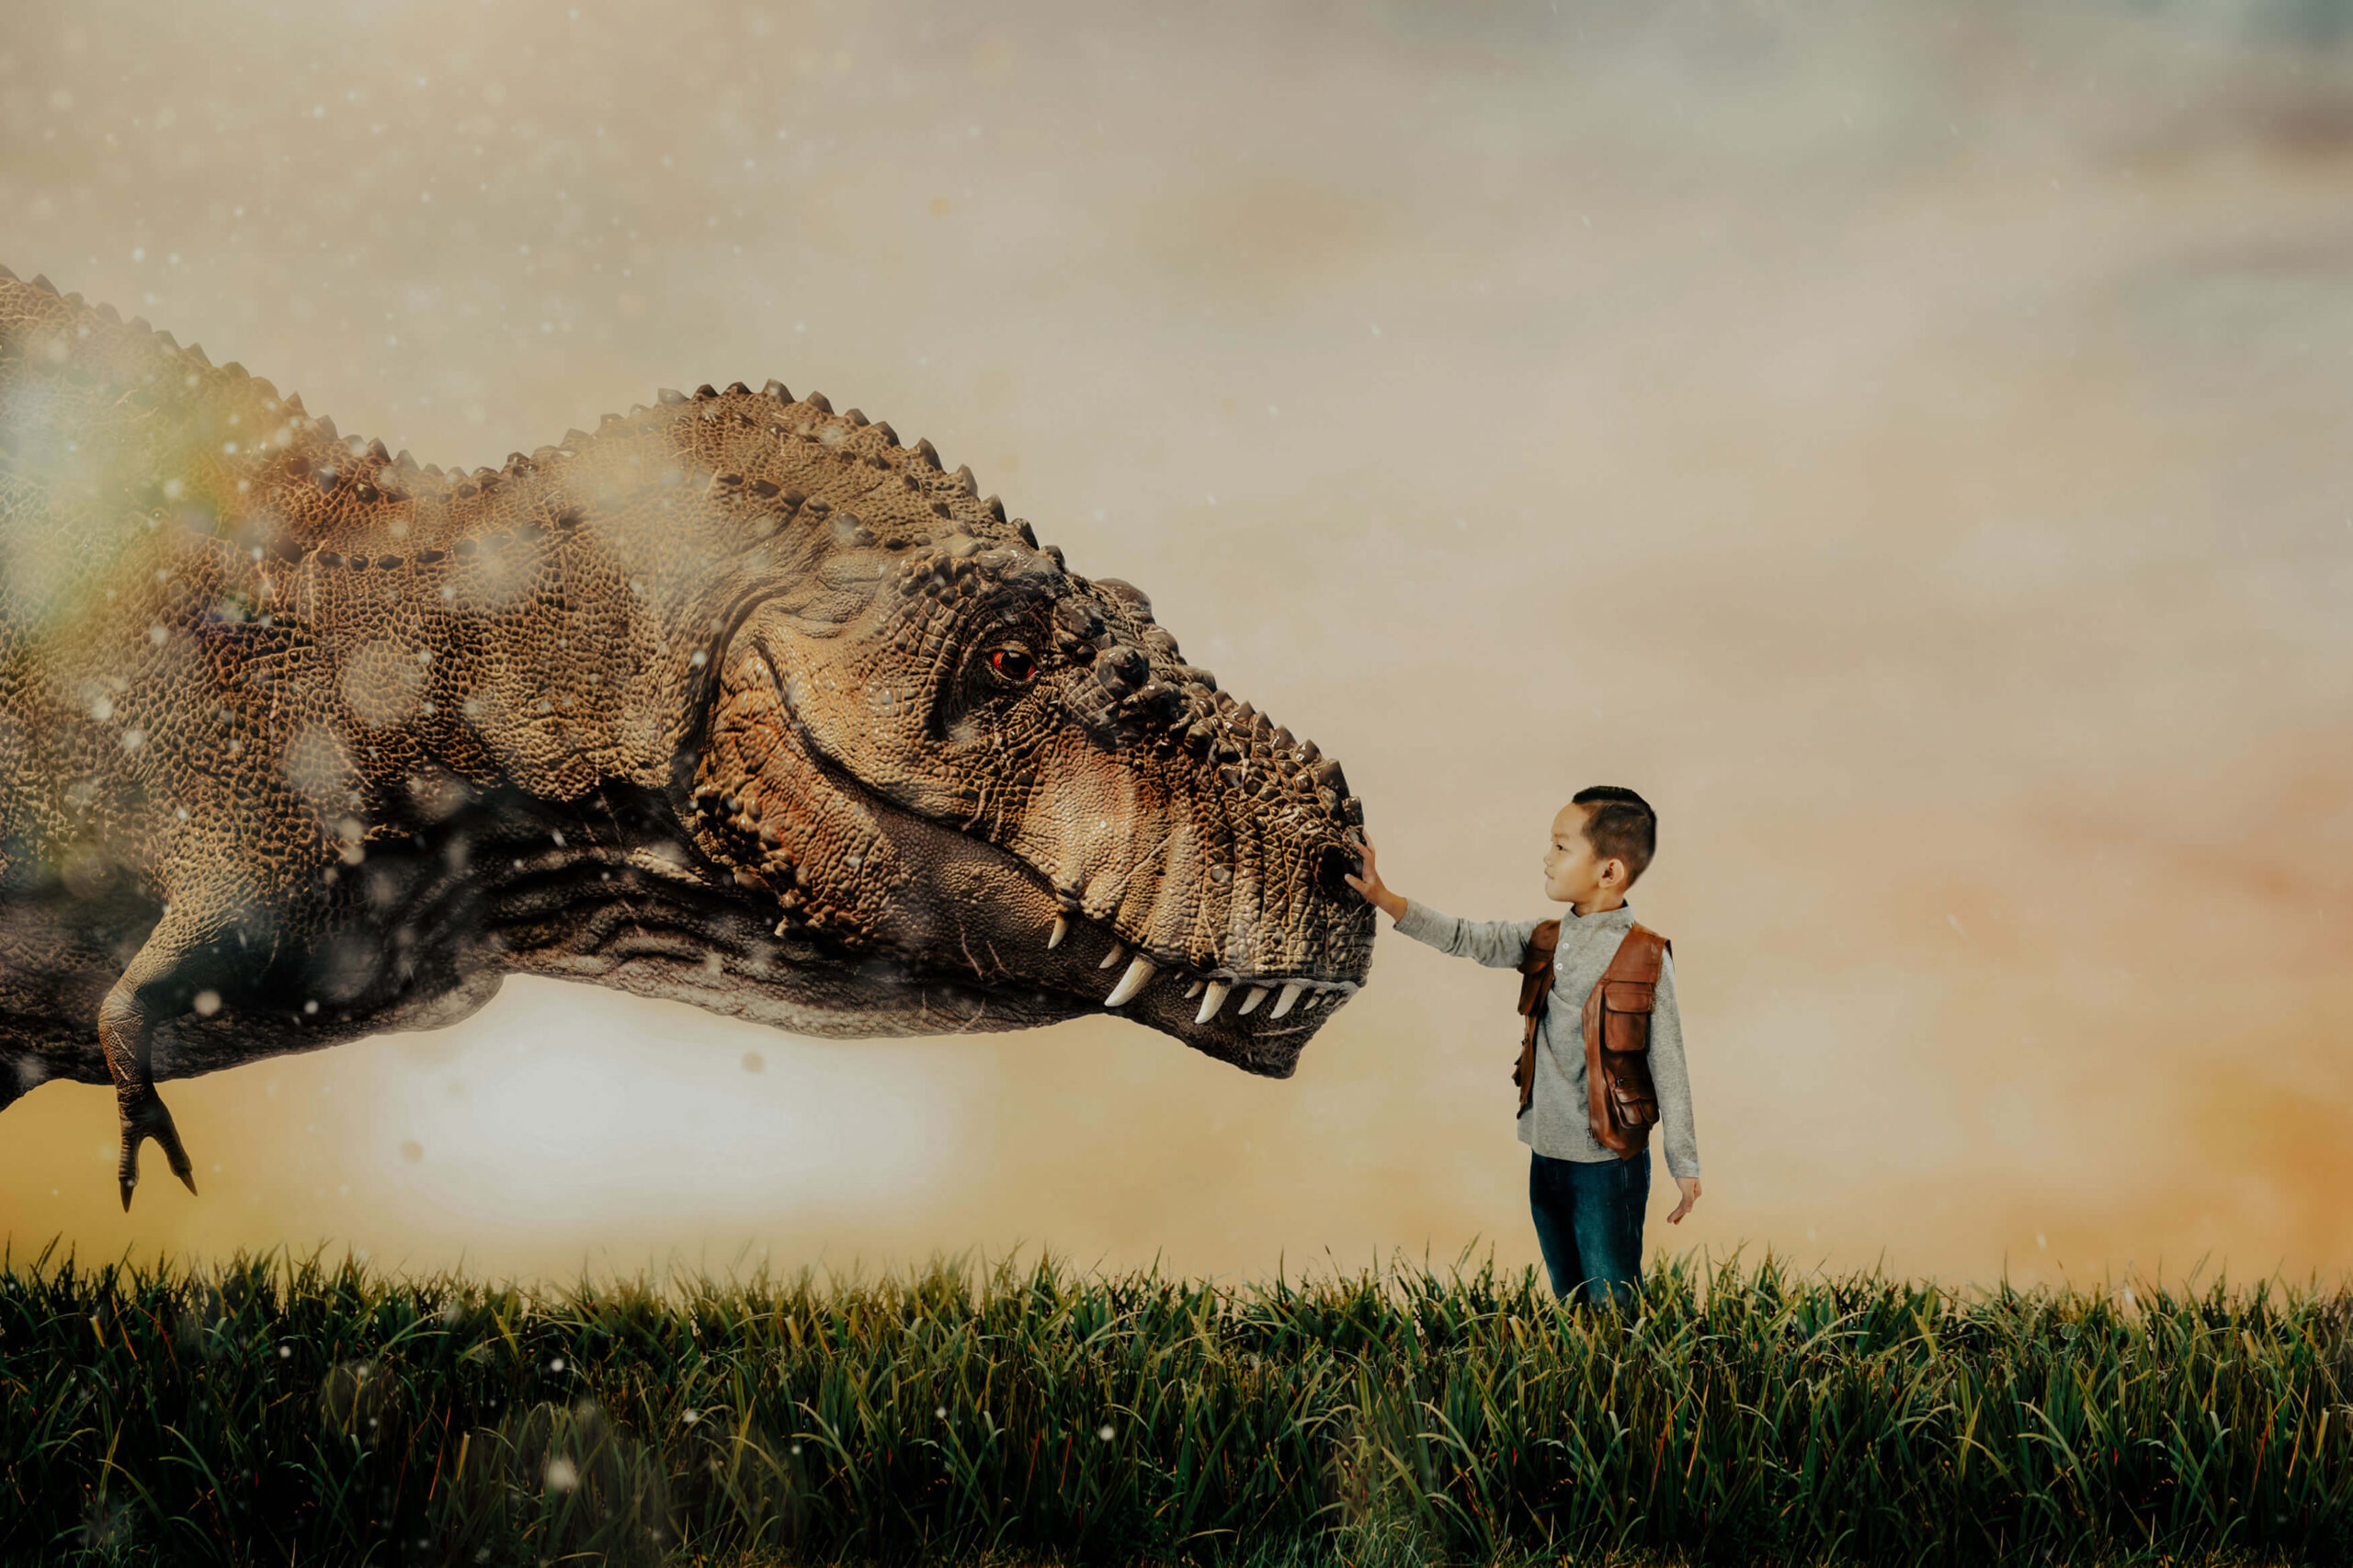 Imagination session with Broom Tree Photo, Wichita KS Photographer, of a little boy touching a t-rex